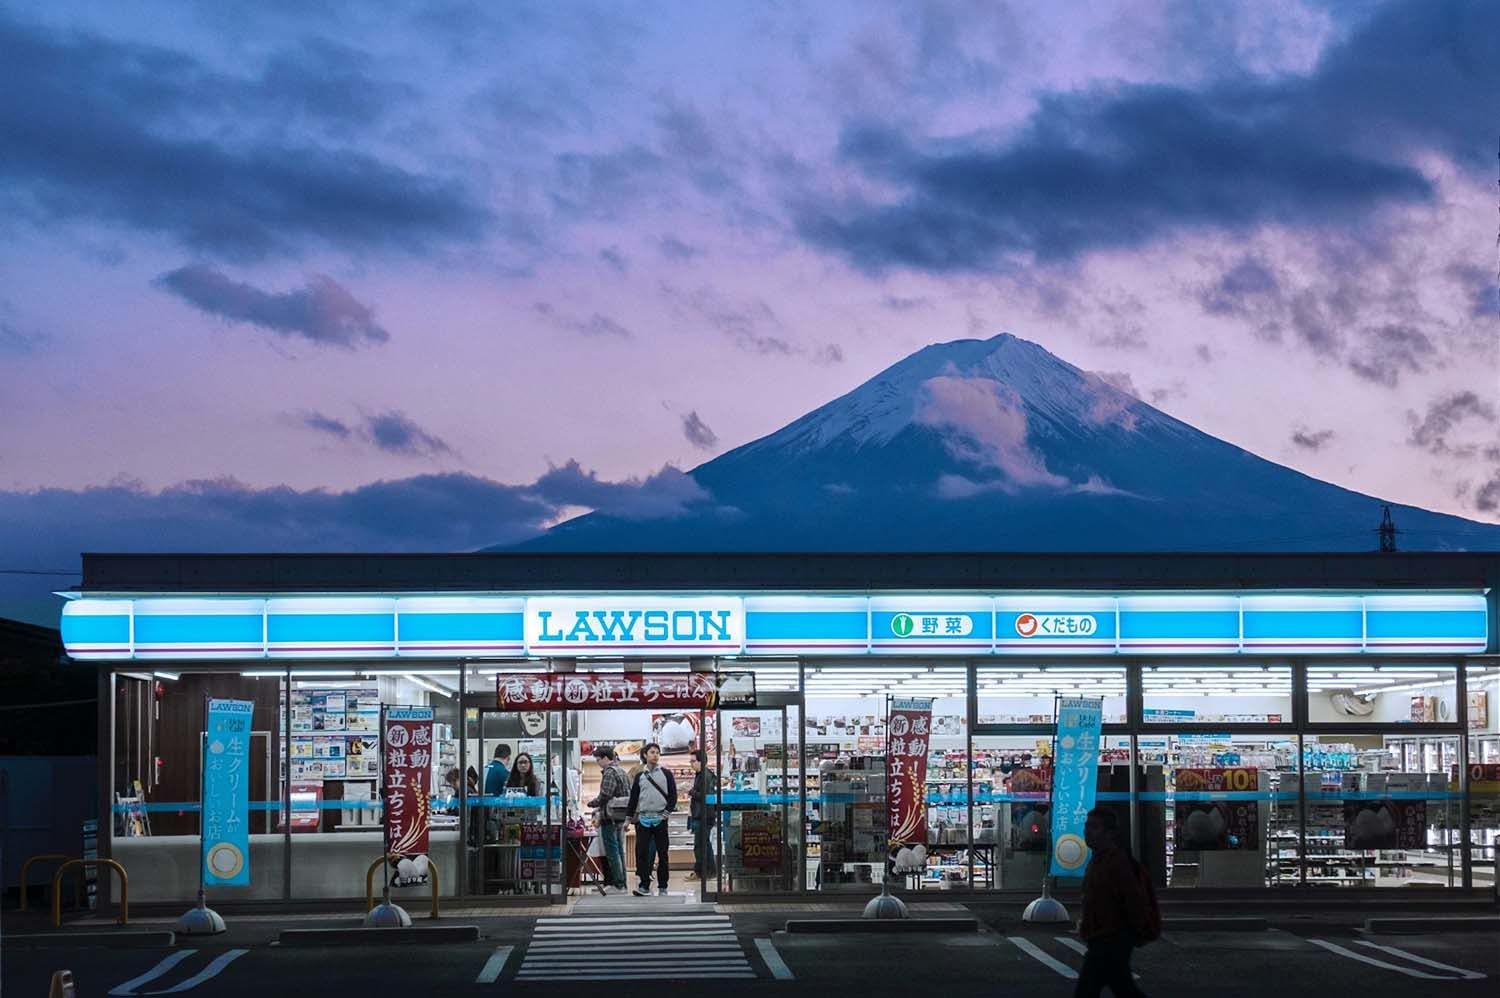 The famous view, now blocked, of Lawson under Mount Fuji in Yamanashi Prefecture. Photo source: Matt Liu (Unsplashed)